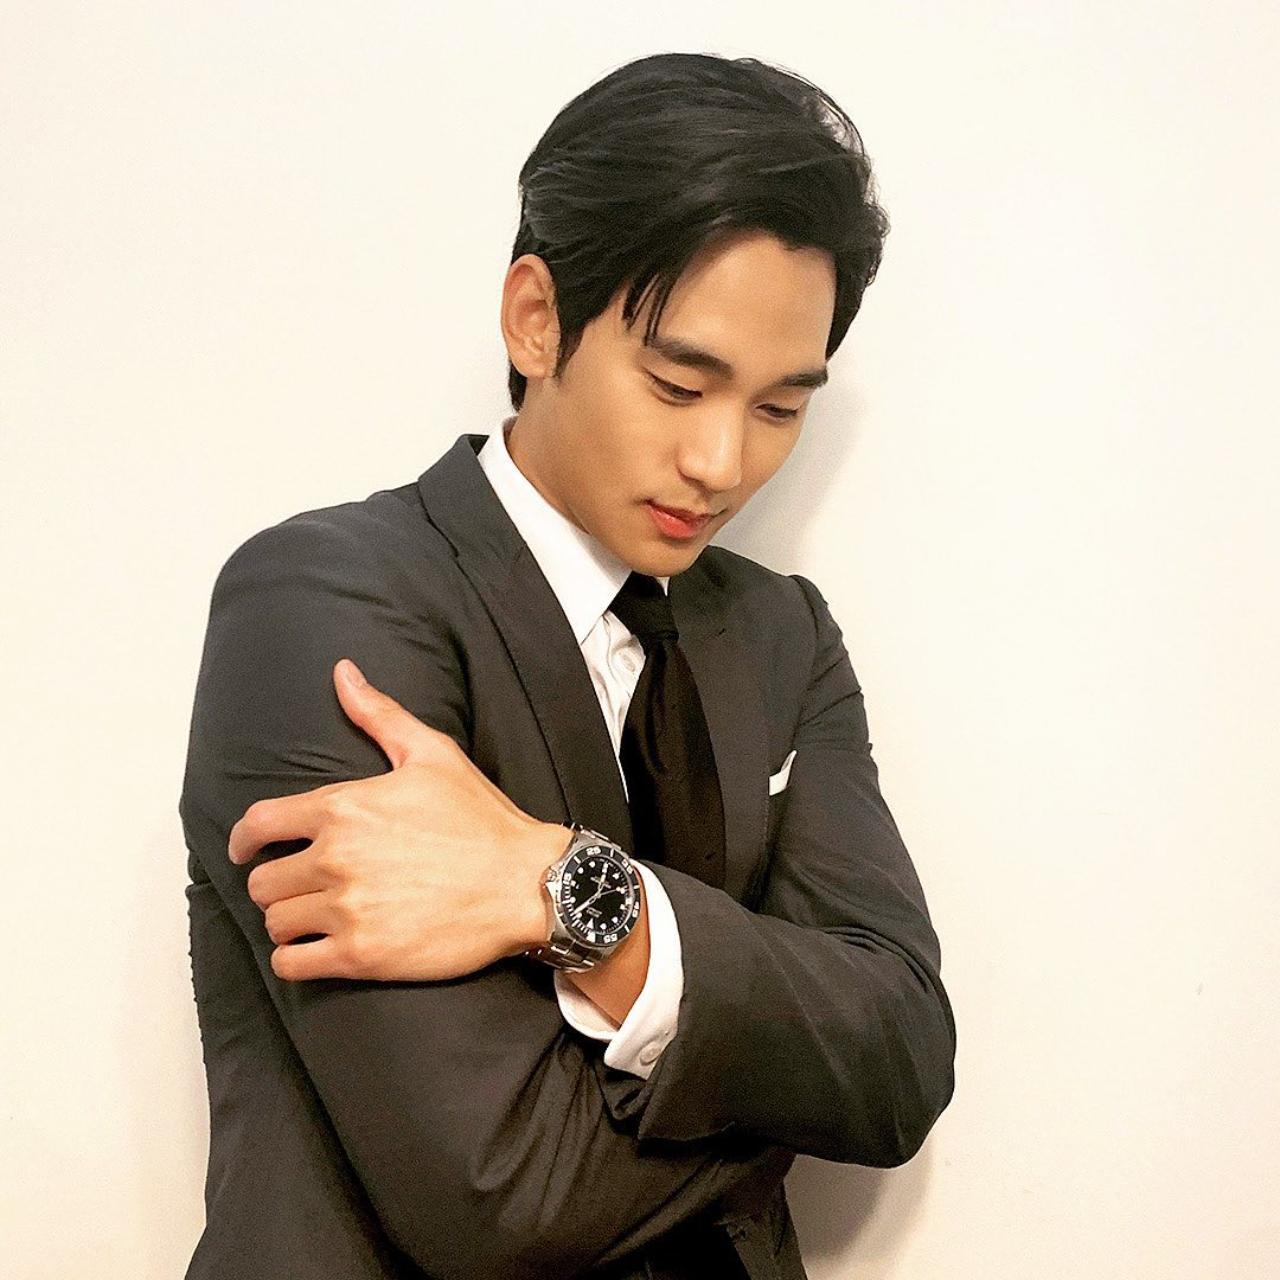 Kim Soo Hyun for Tommy Hilfiger and Mido
Kim Soo Hyun may have fooled as being the country bumpkin in High School Musical-esque K-drama, 'Dream High,' but he had undergone a major glamup since then. The actor was South Korea's highest paid actor in 2020 and was also appointed as the Asian ambassador for legendary Swiss watchmaker Mido. In his promotions for the label, Soo Hyun flaunted classic and edgy pieces that glinted of both the retro and modern - literally time travelling!